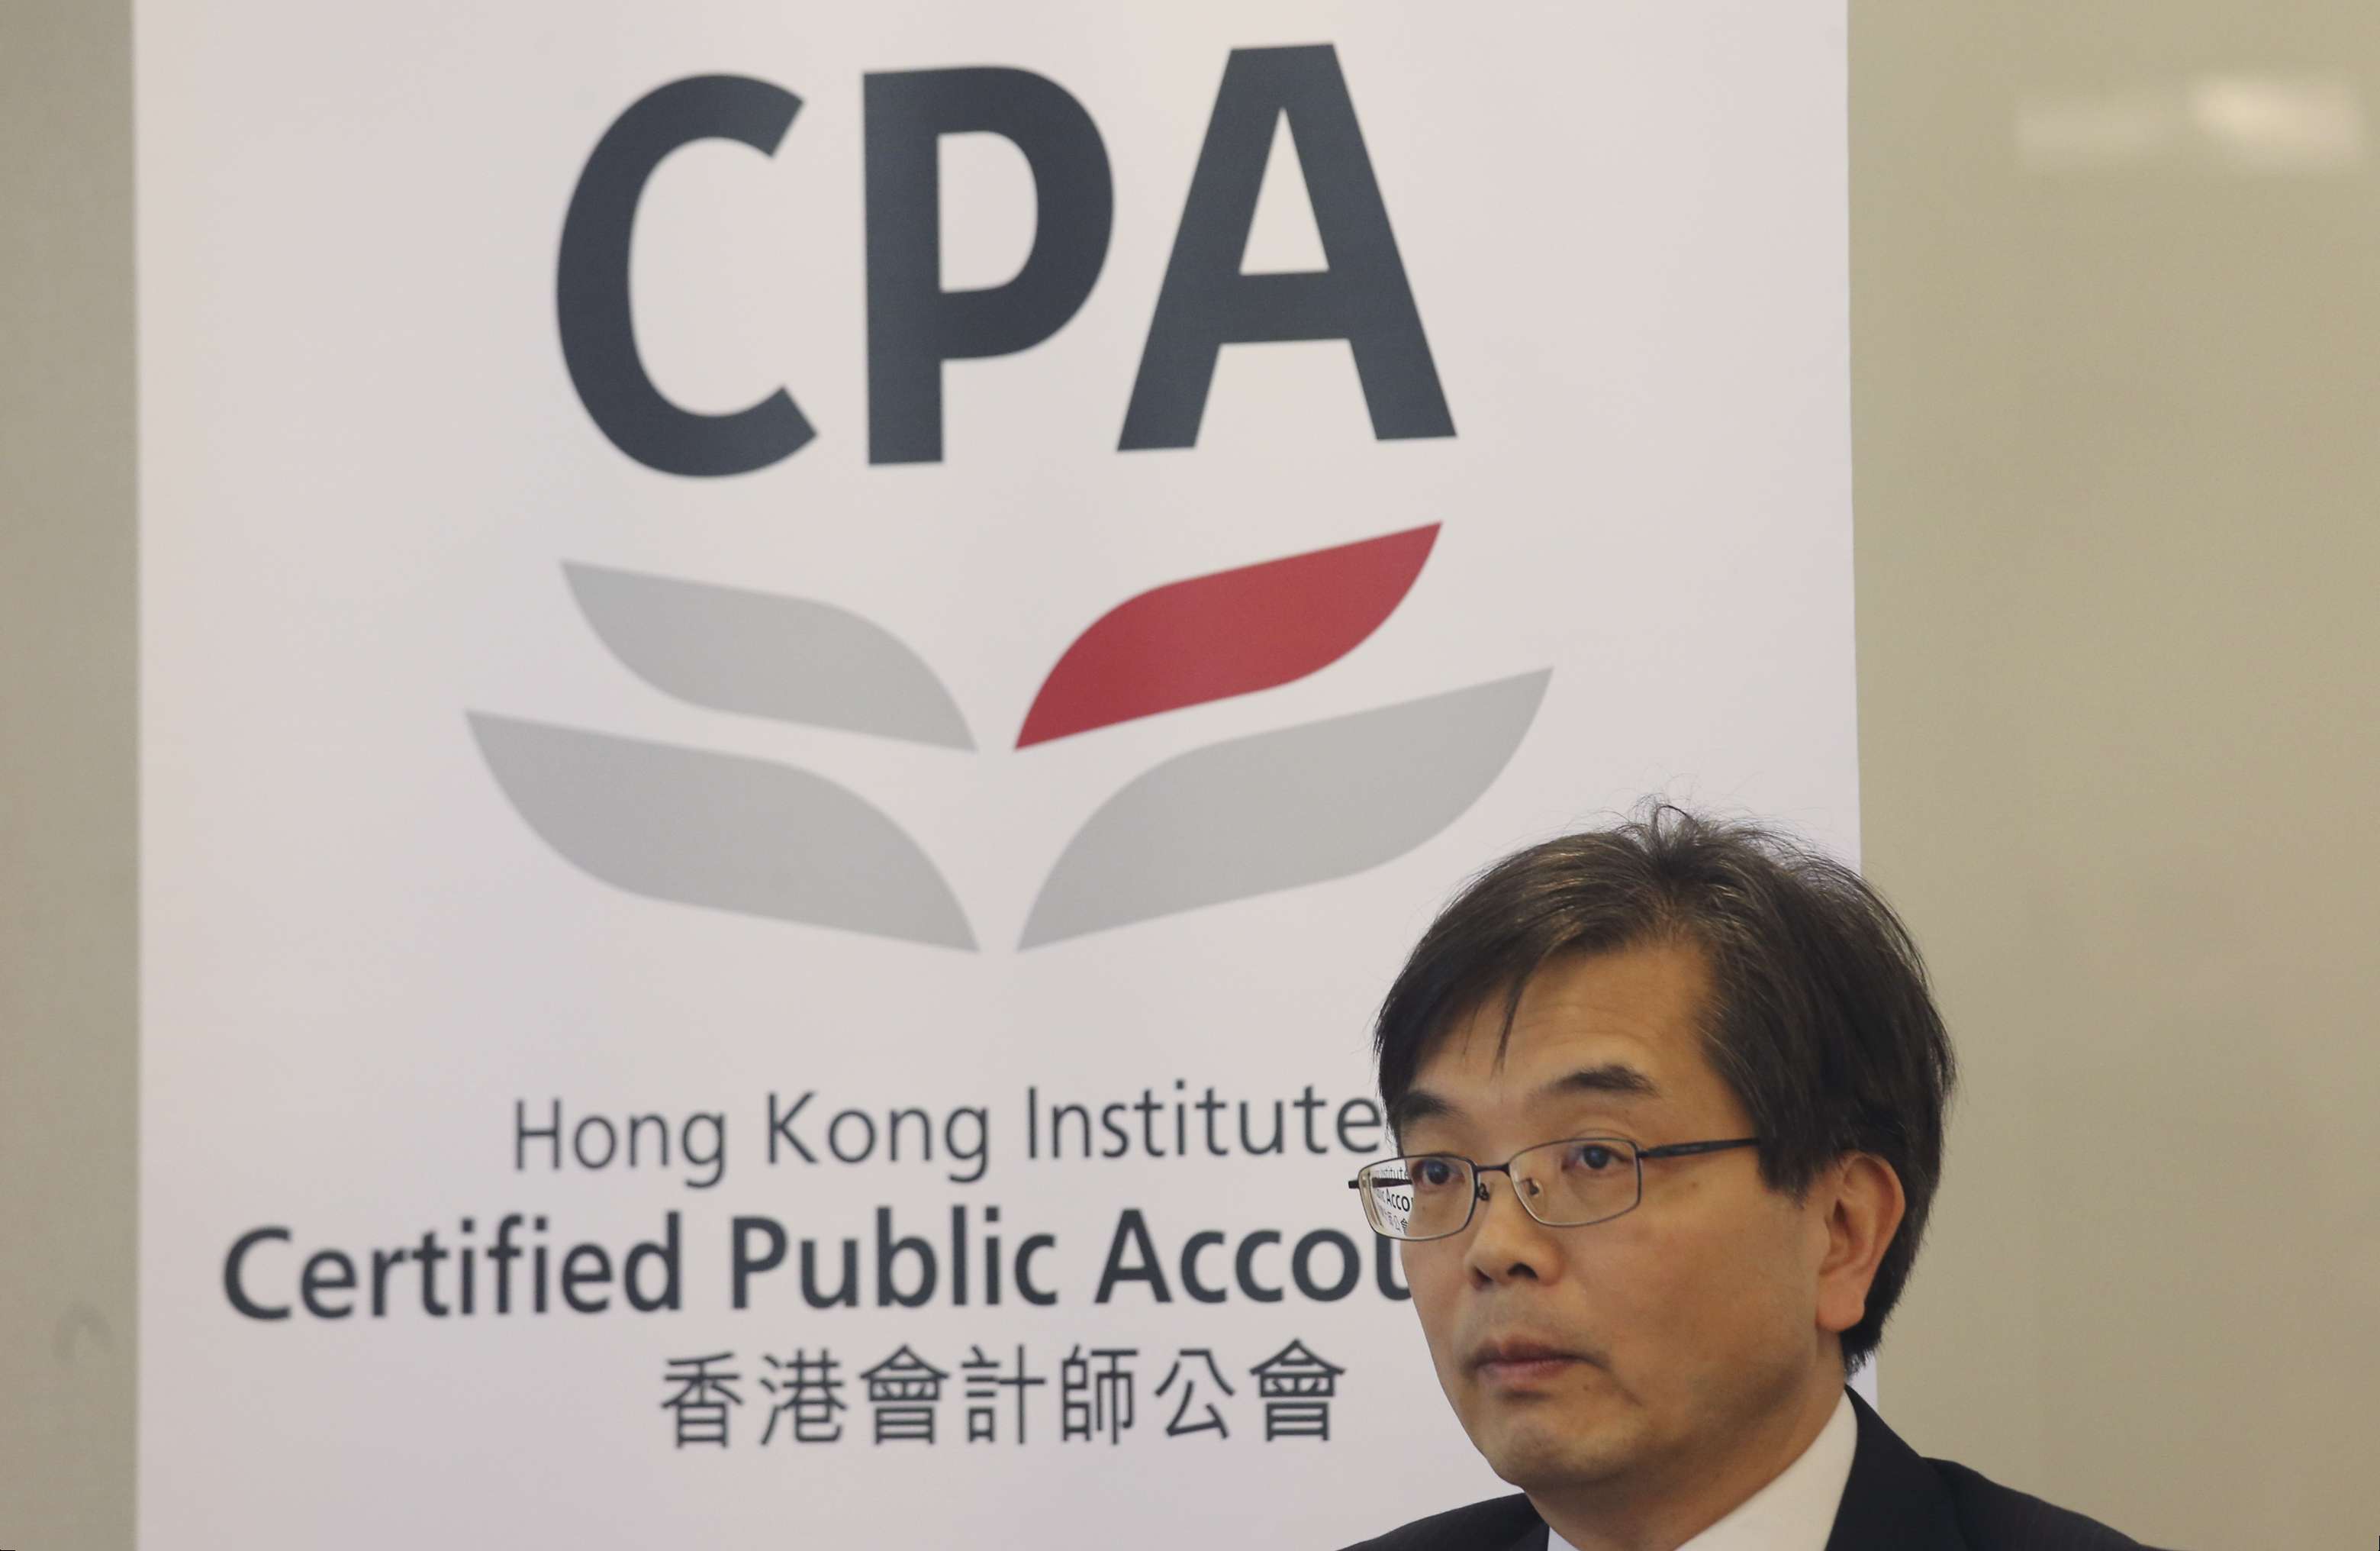 Raphael Ding Wai-chuen, chief executive of the Hong Kong Institute of Certified Public Accountants, says fewer companies plan to hire because of the negative economic outlook, with more than half of the respondents describing the next 18 months as uncertain. Photo: David Wong